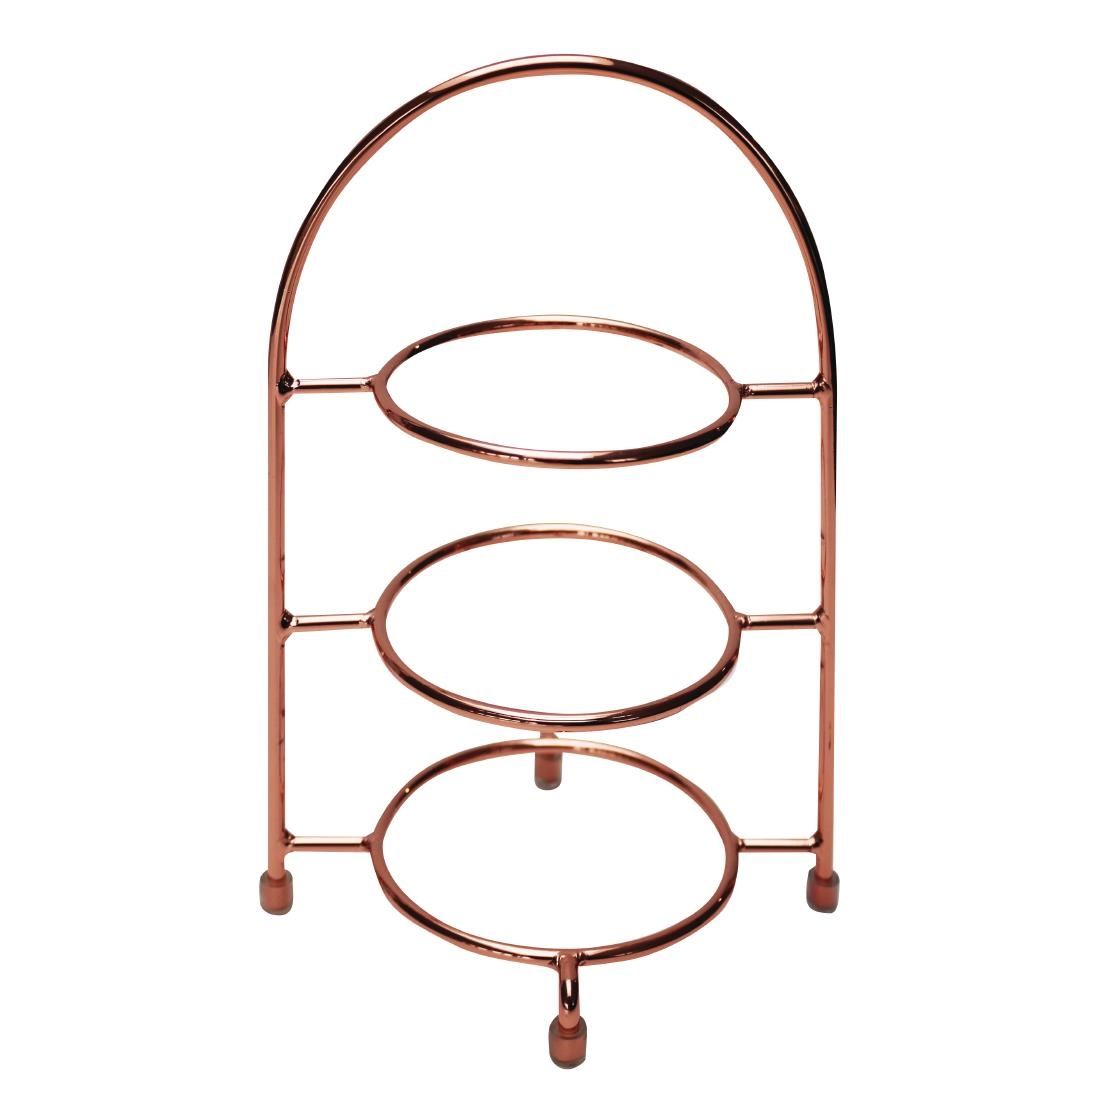 DE896 APS Copper Plate Stand for 3x 170mm Plates JD Catering Equipment Solutions Ltd